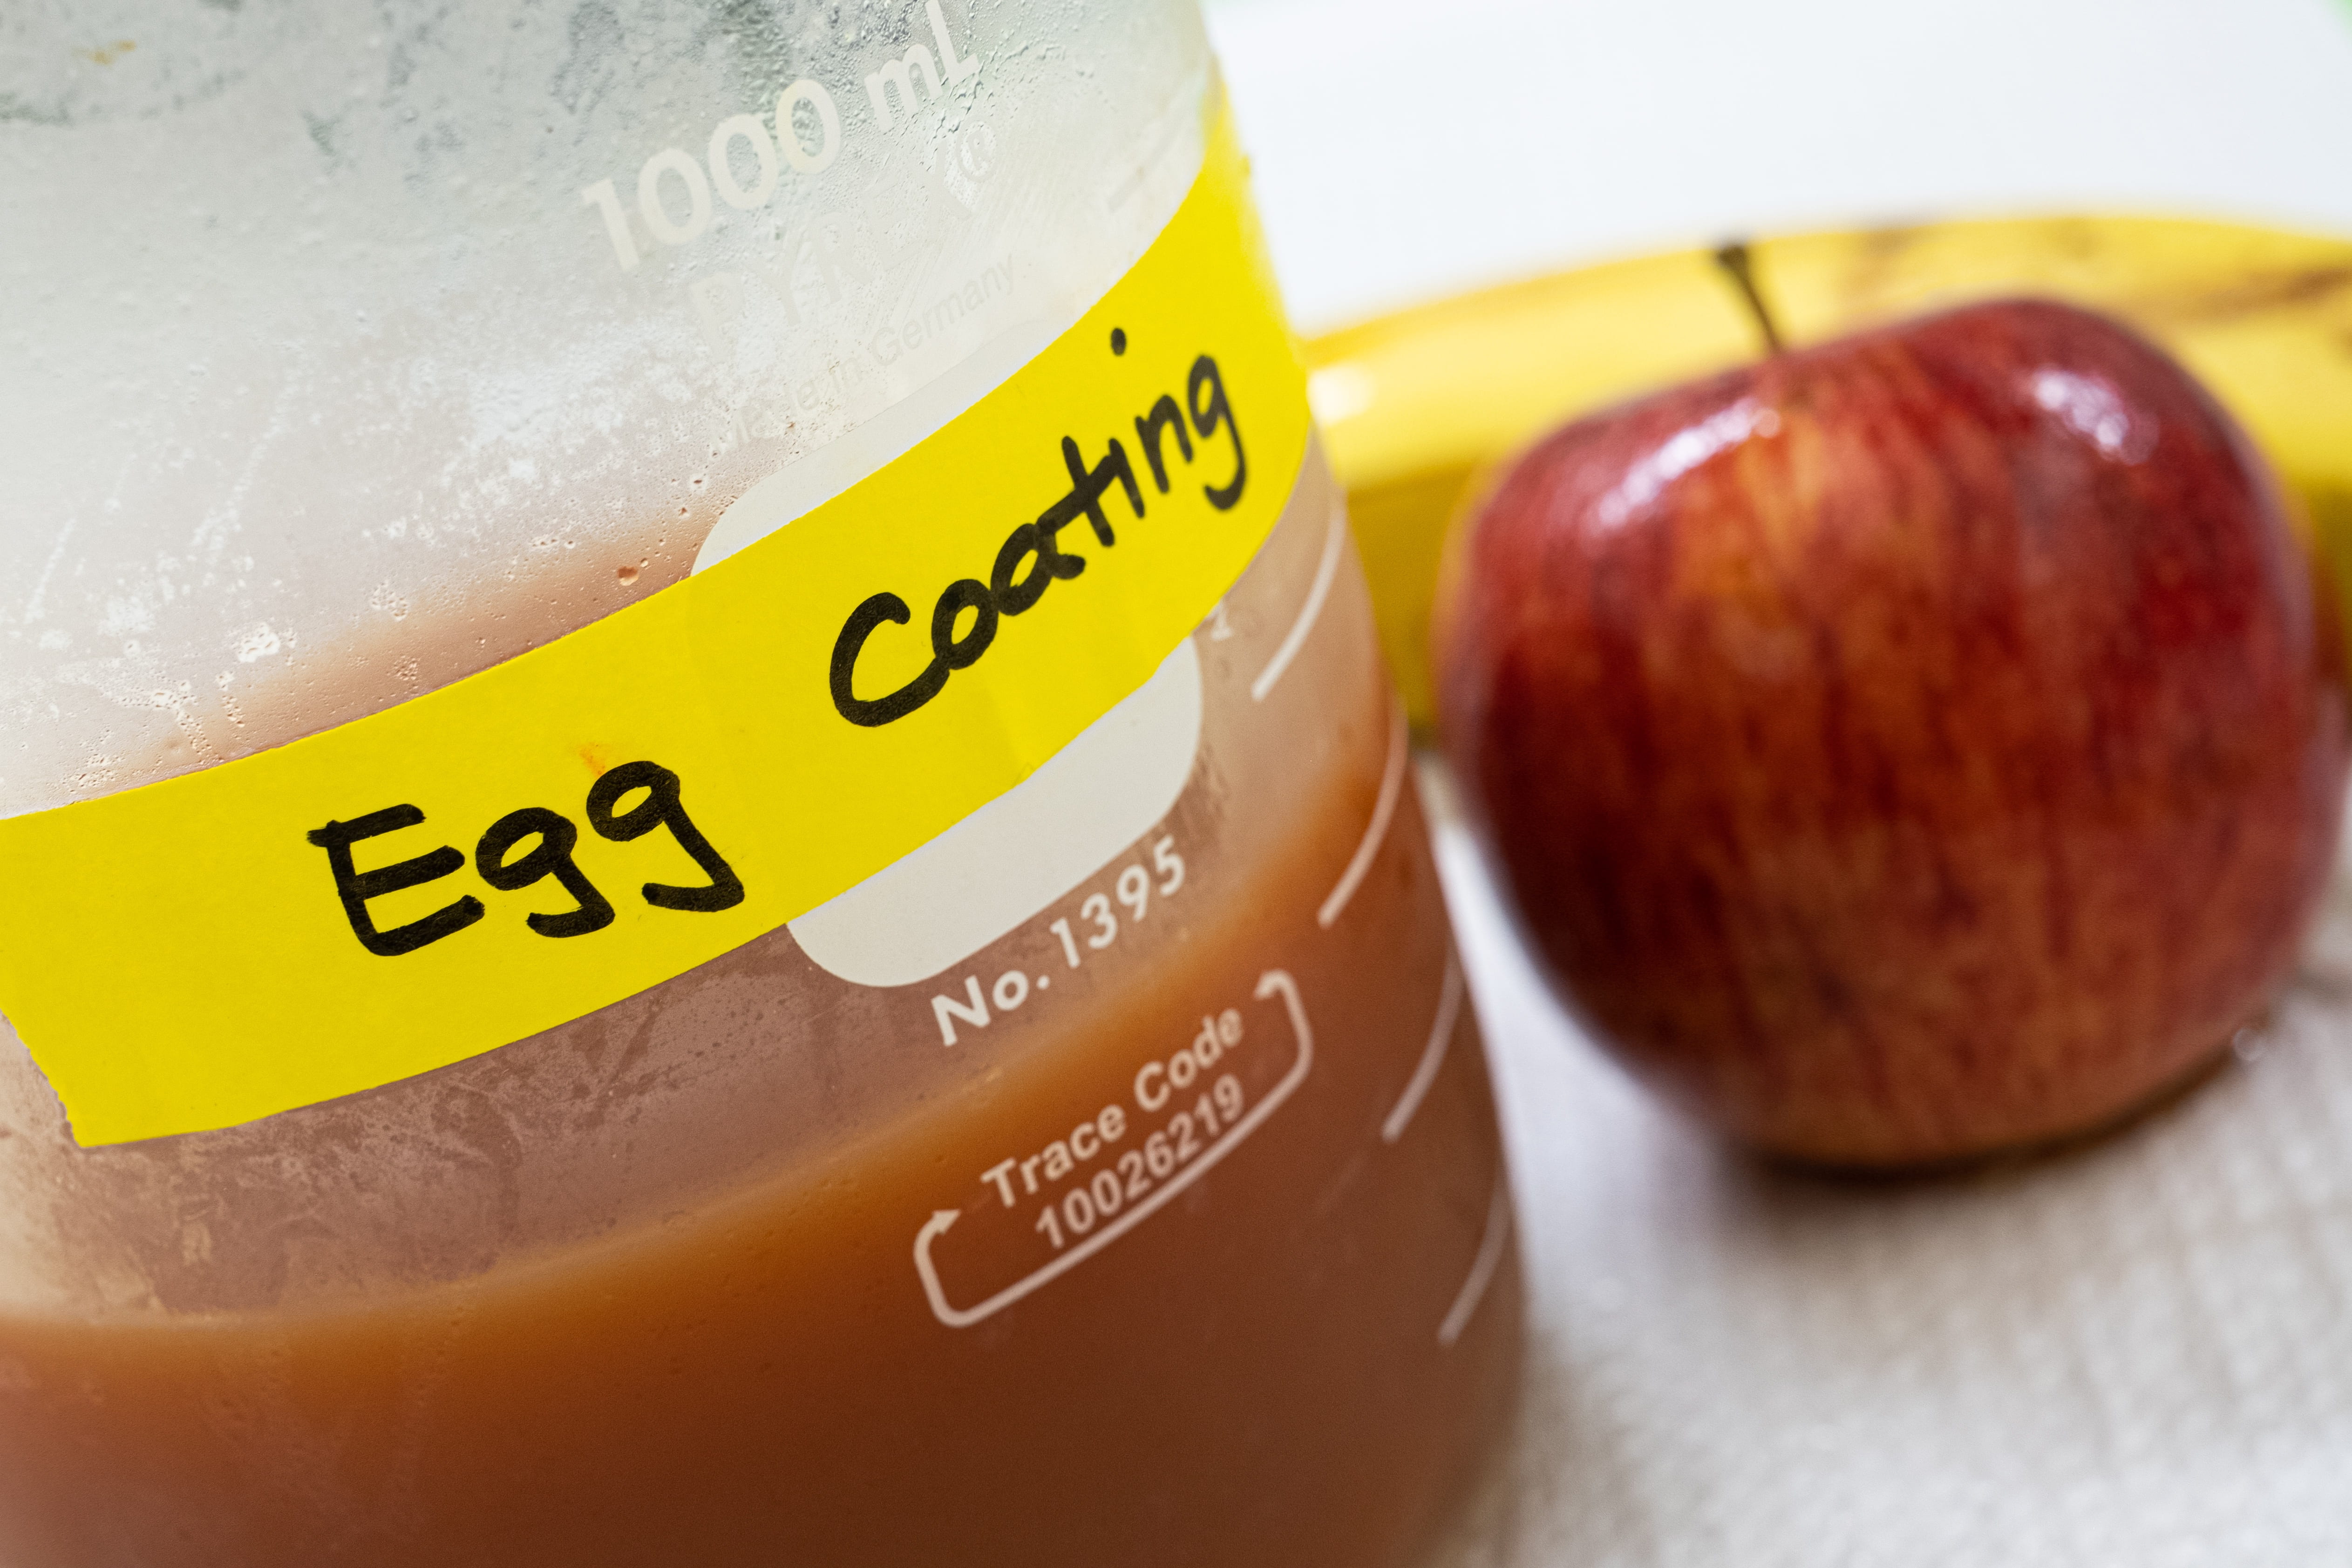 A brown liquid sits in a glass container labeled "egg coating" with an apple and banana sitting next to it